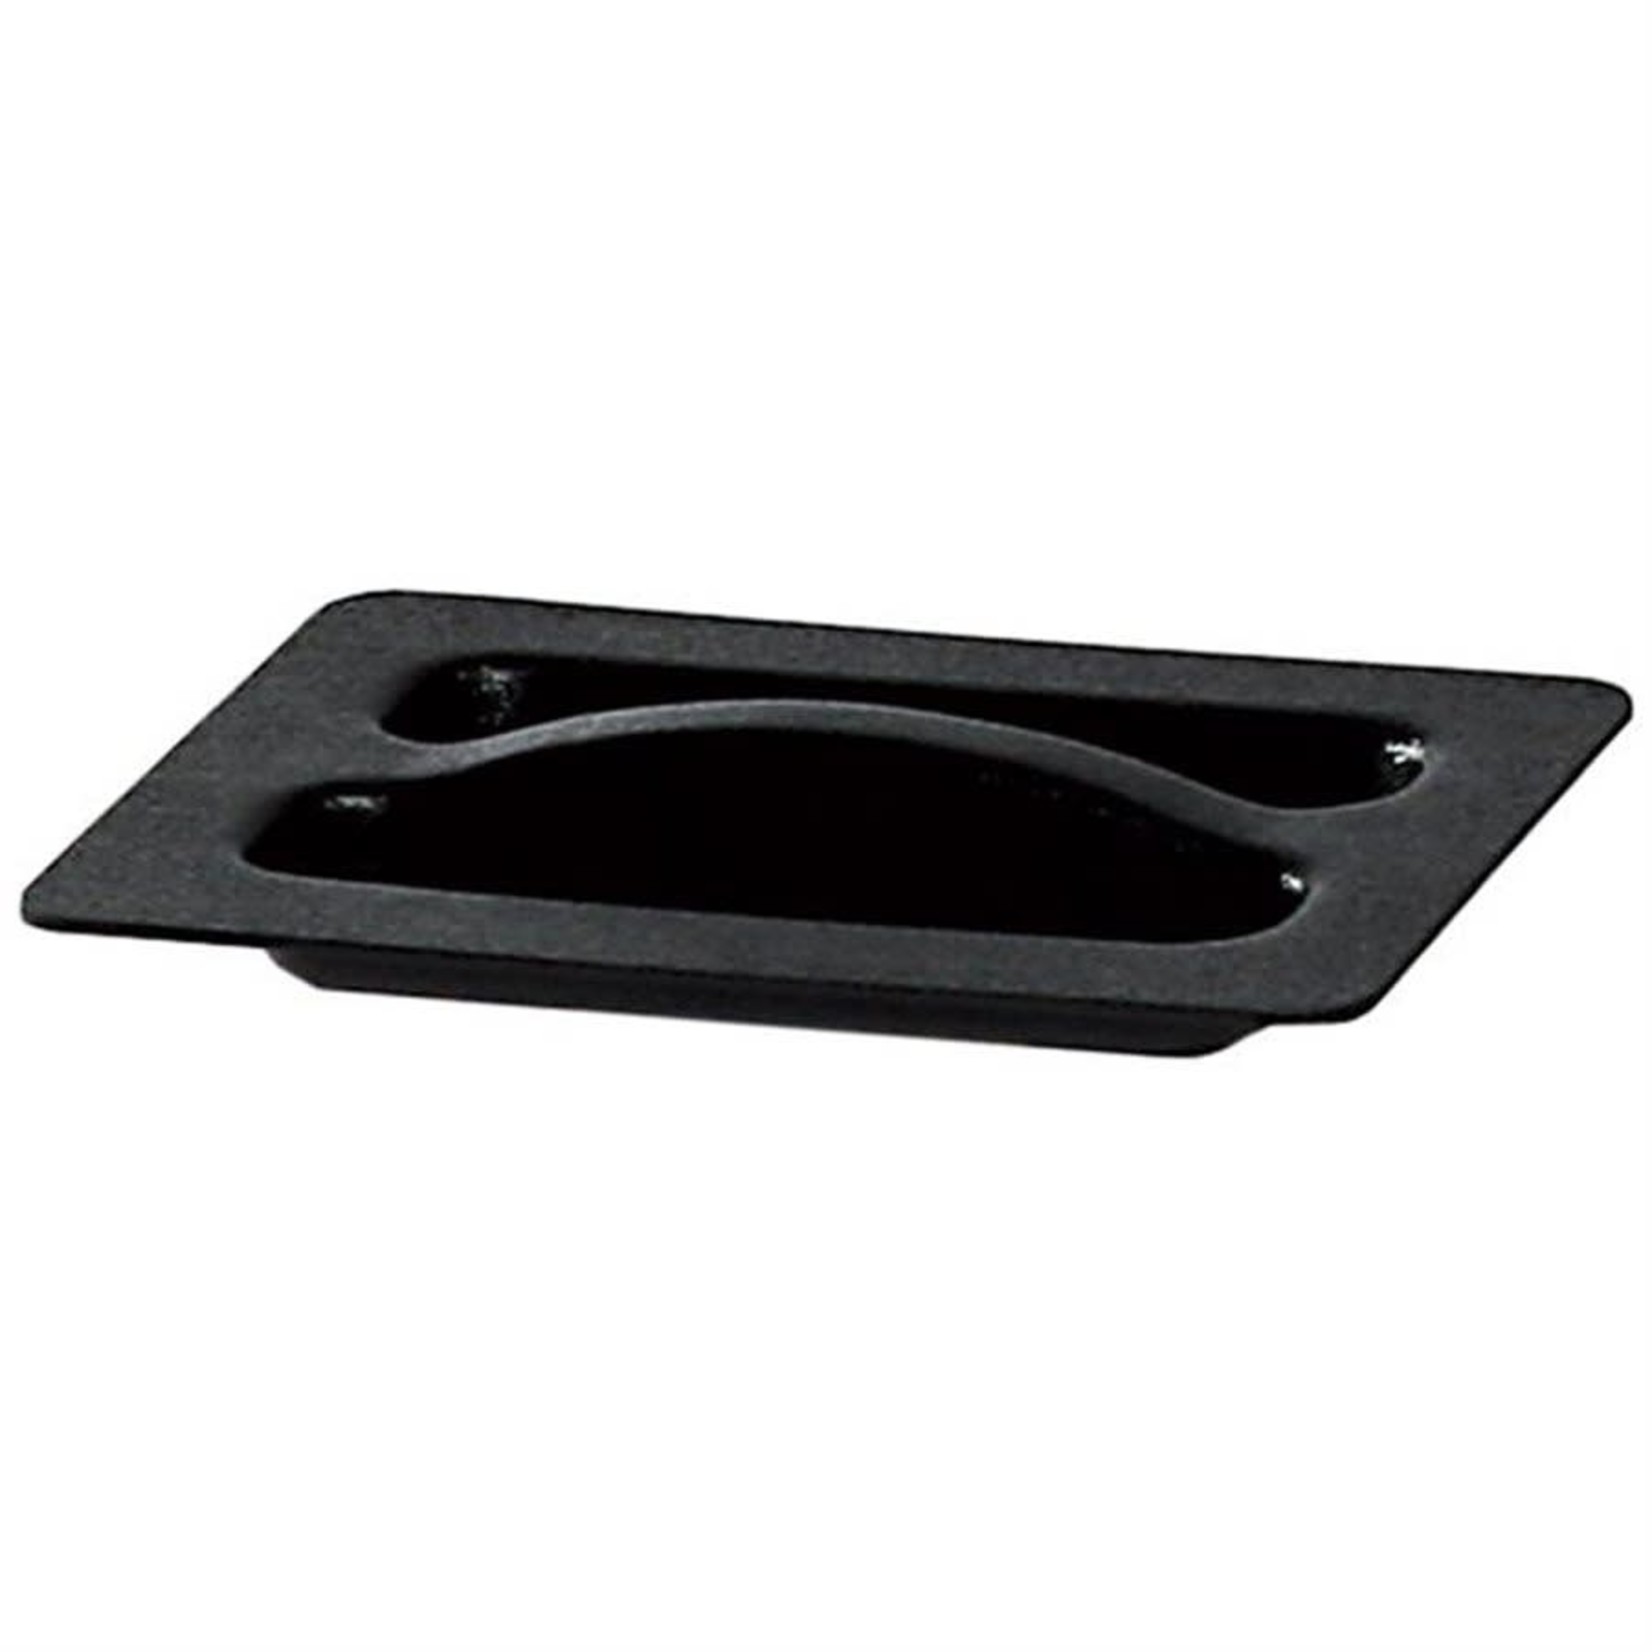 PORT HOLE COVER- FITS ALL SIZES